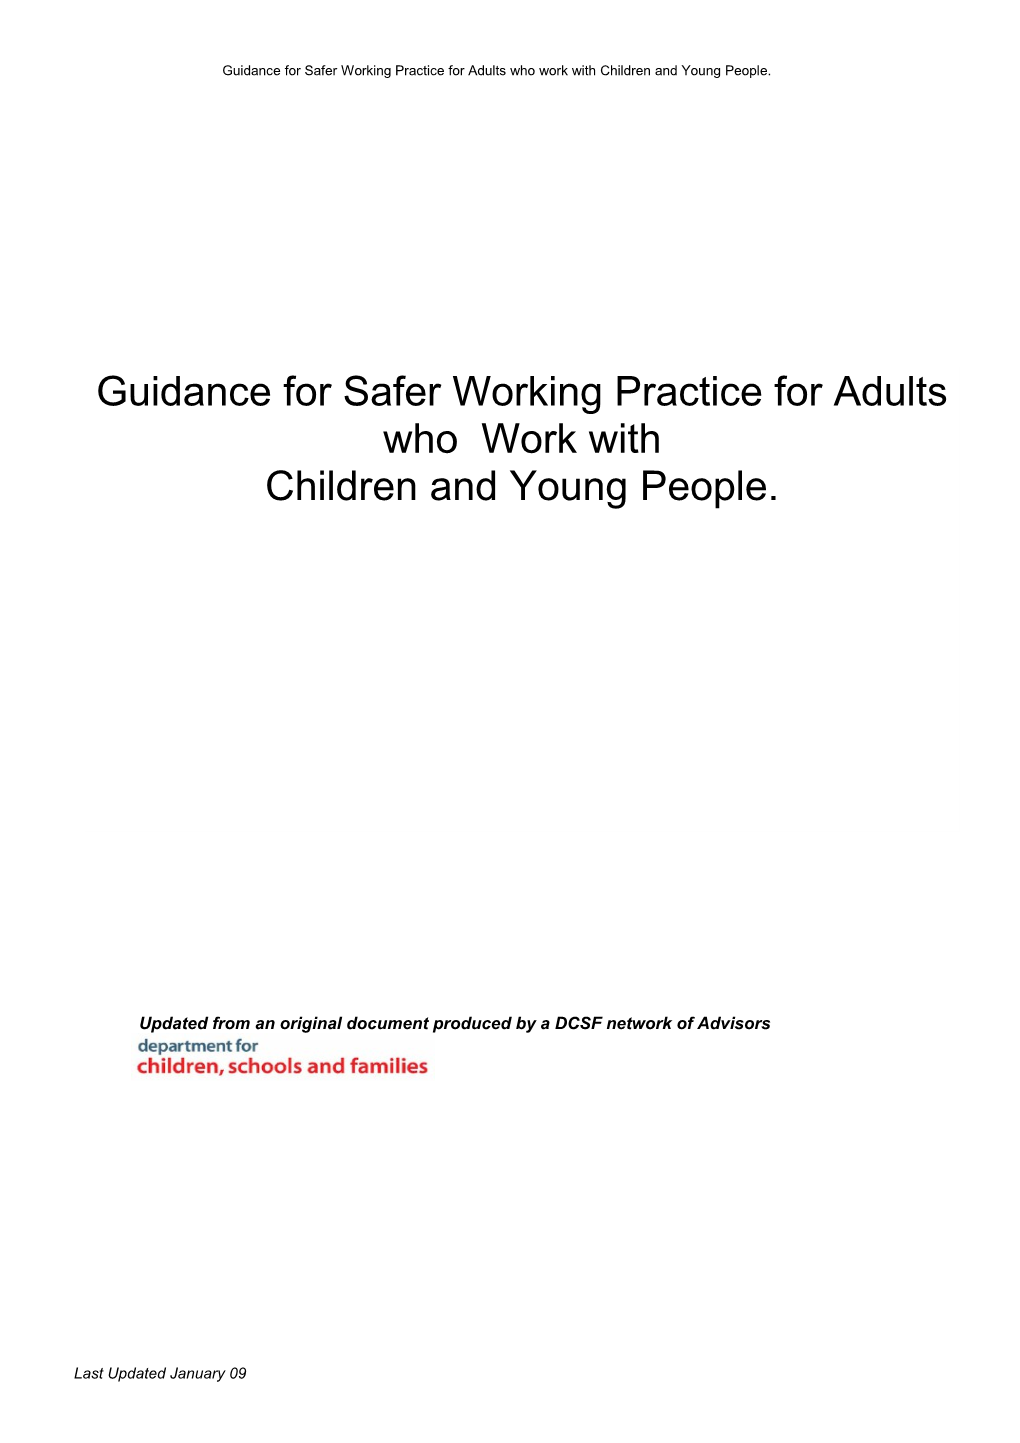 Guidance for Safer Working Practice Working with Children and Young People